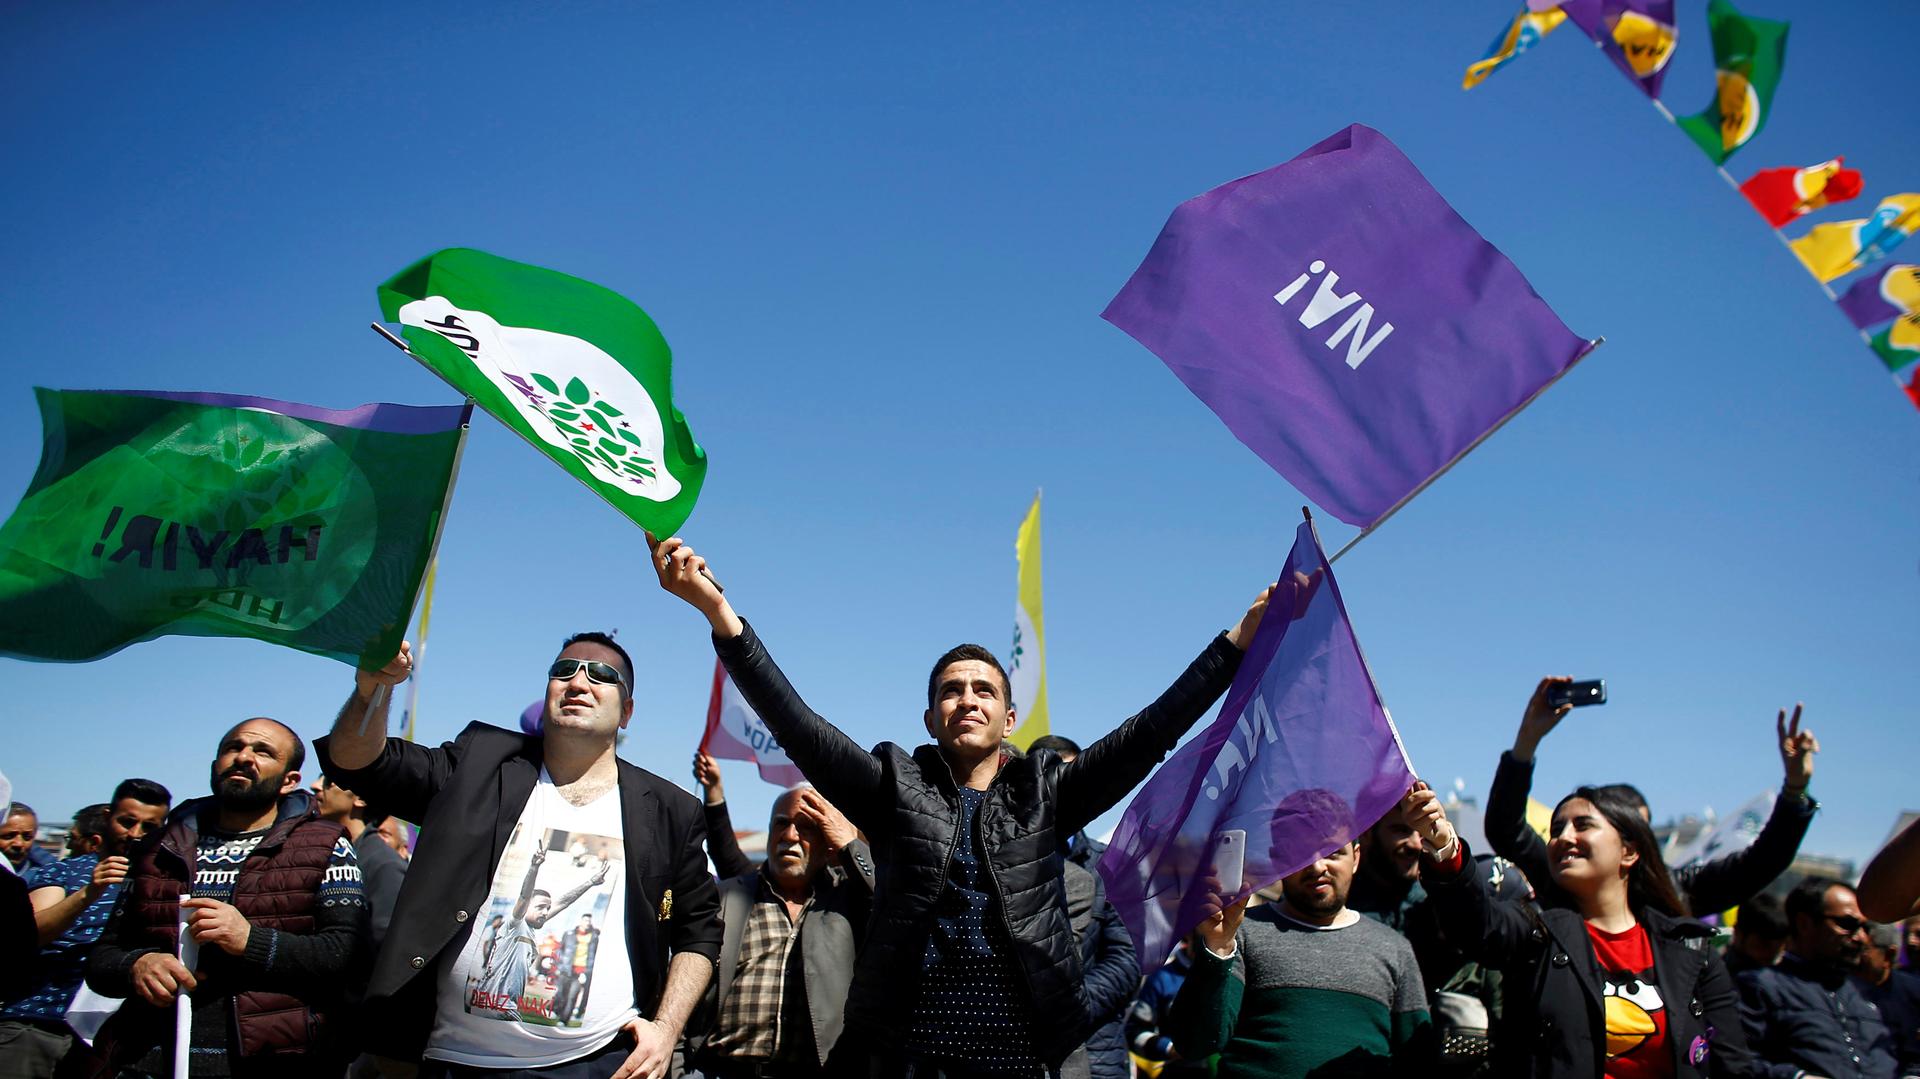 Pro-Kurdish opposition Peoples' Democratic Party (HDP) and "Hayir" ("No") supporters attend a campaign for the upcoming referendum in Istanbul, Turkey, April 13, 2017.